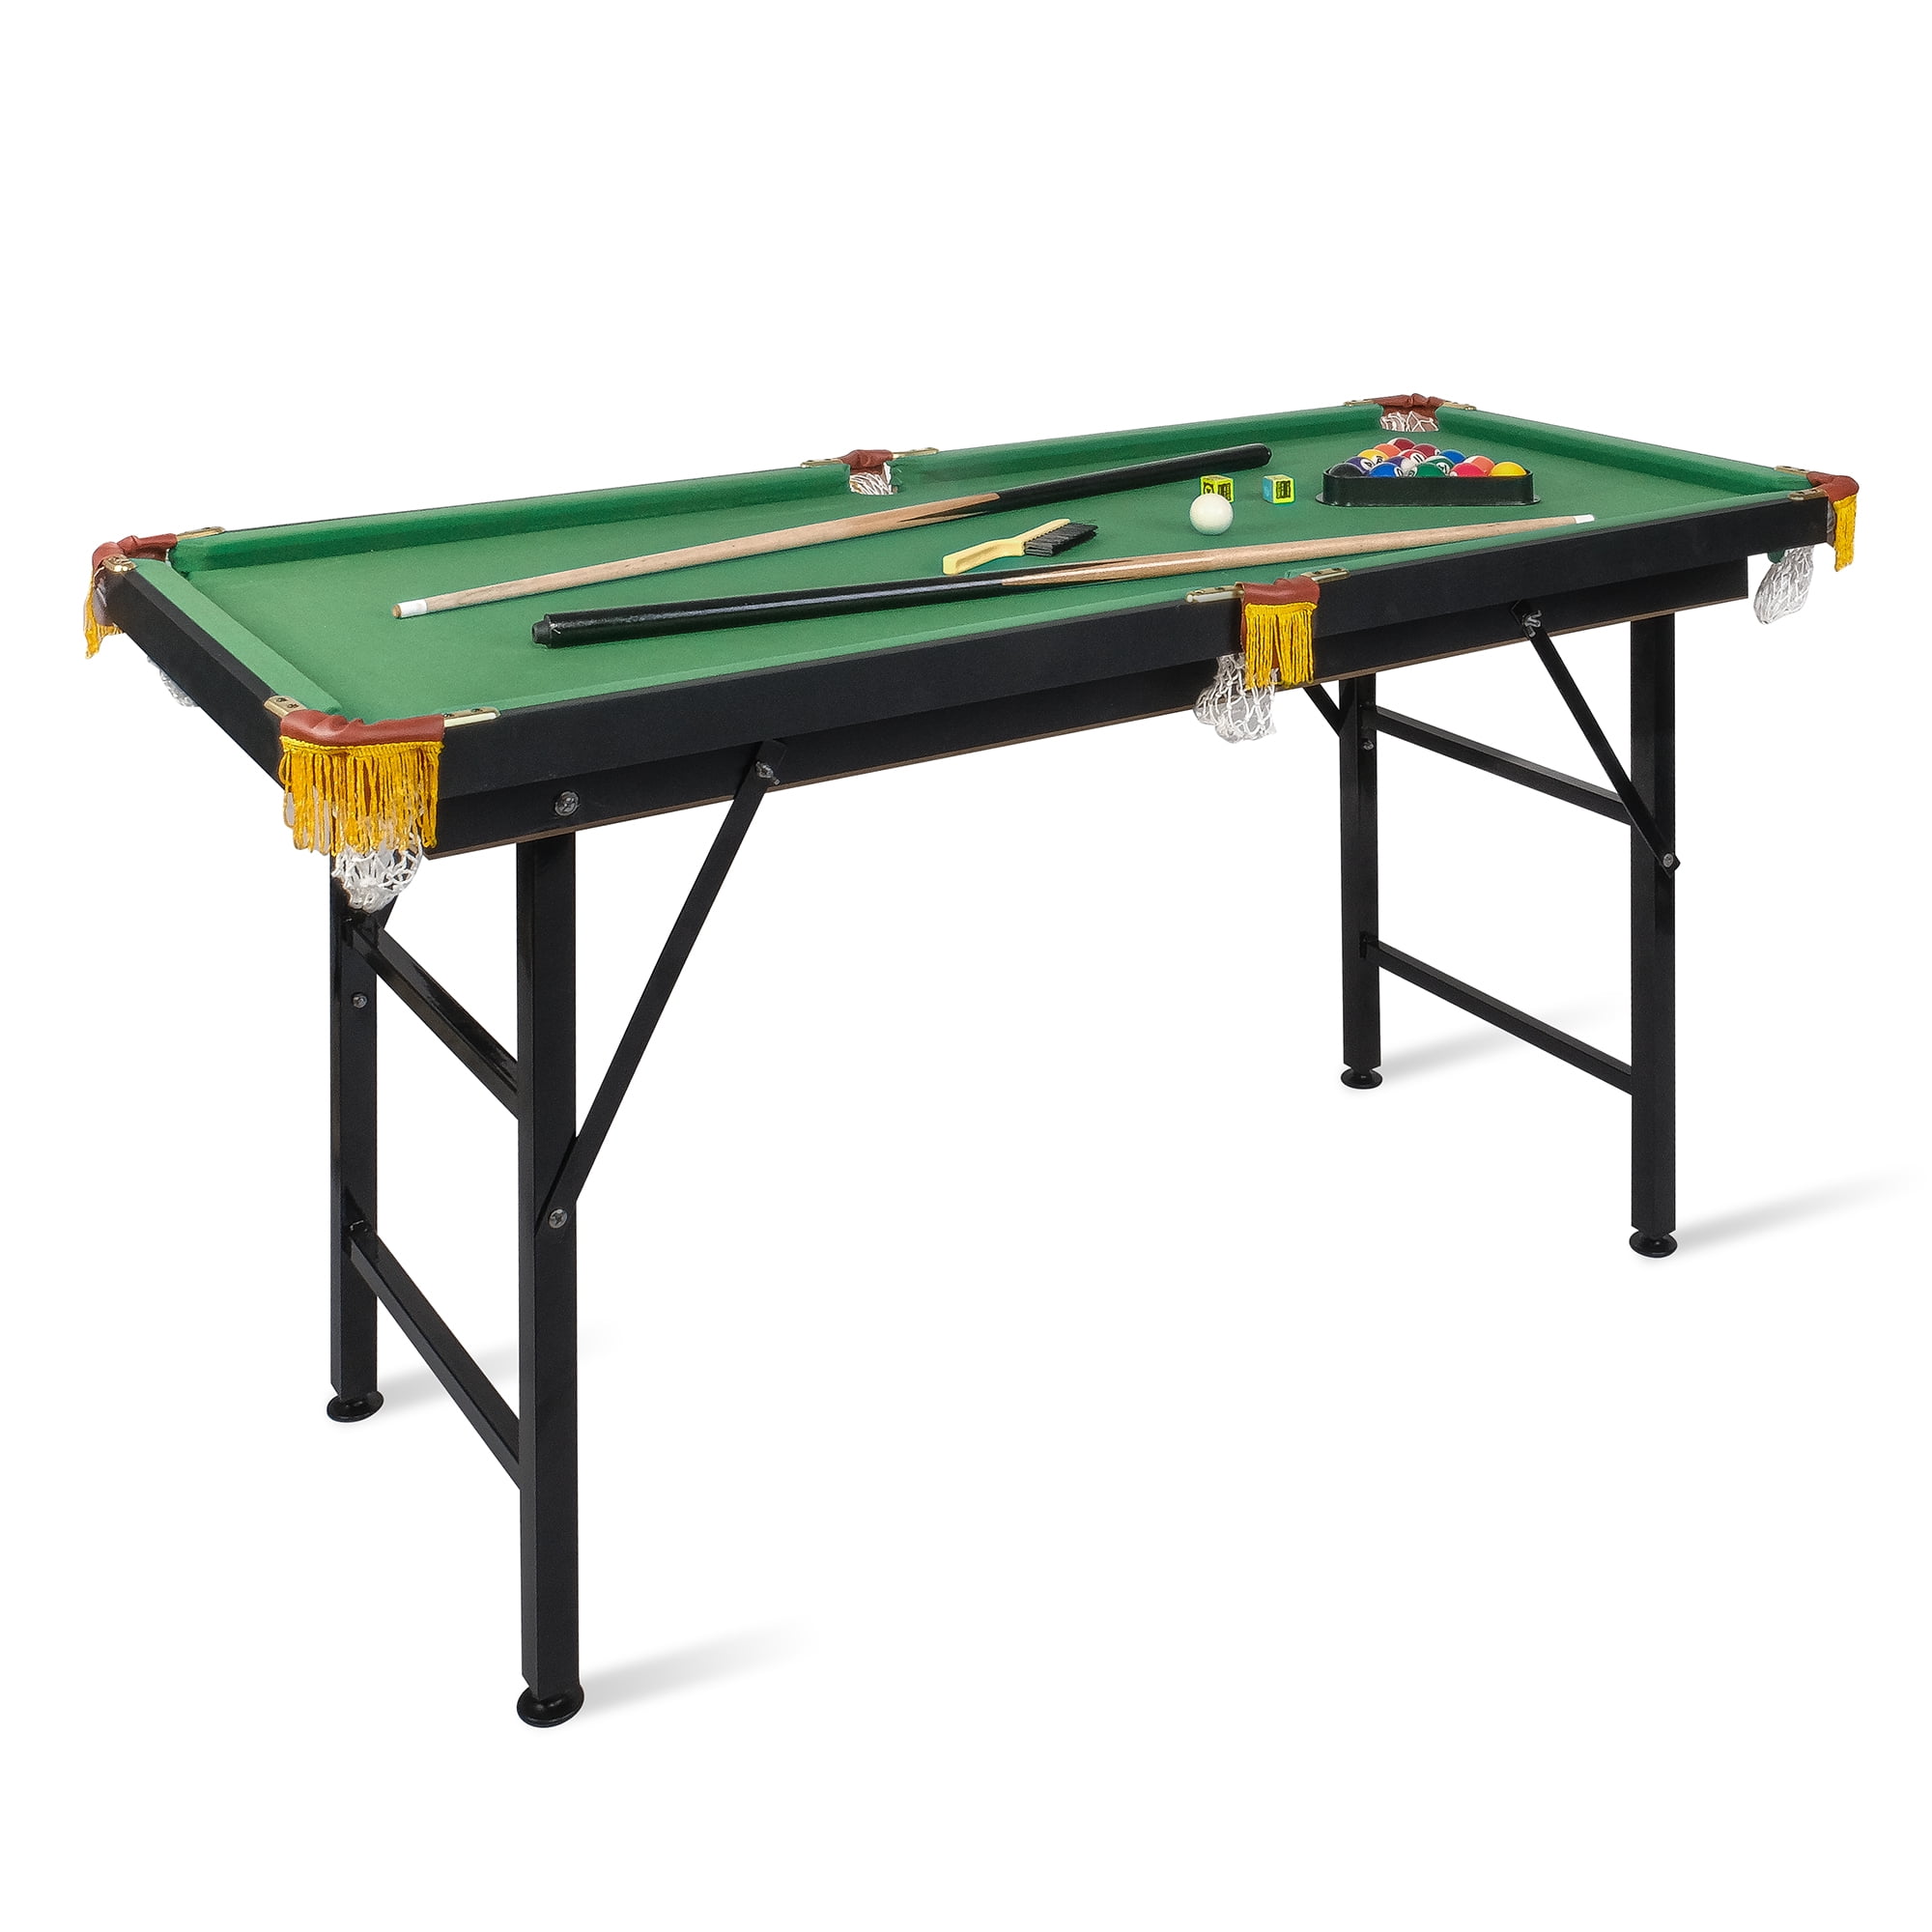 Forest & Twelfth Mini Tabletop Pool Table Kids Table-Top Billiards Game for Kids and Adults Great for Fun Times at Home 